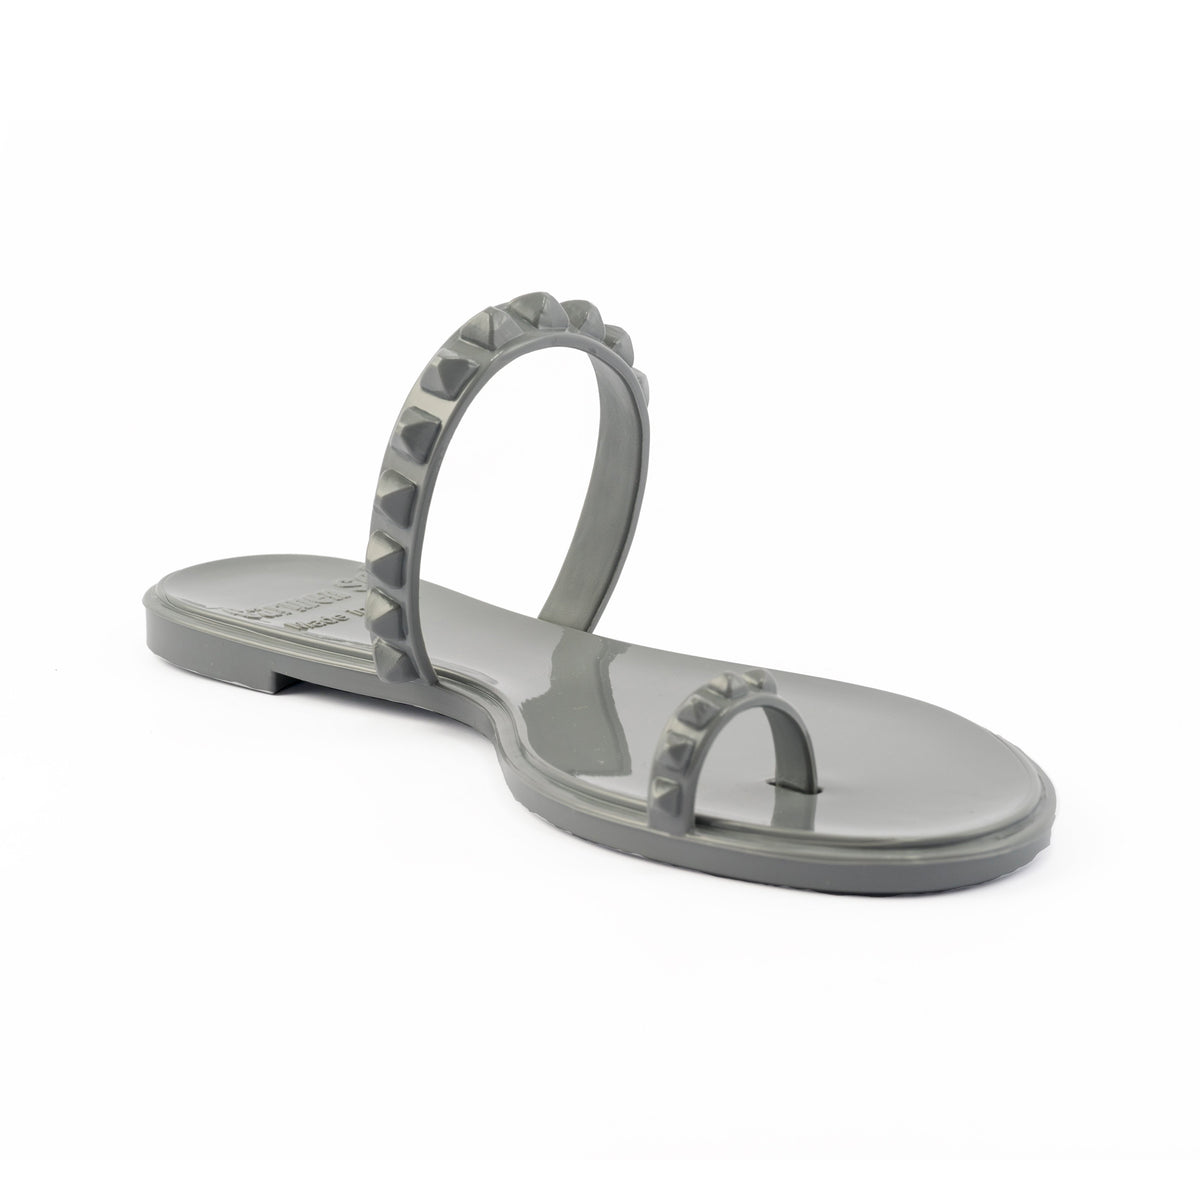 Carmen Sol grey jelly sandals, slide sandals for women with studs on sale